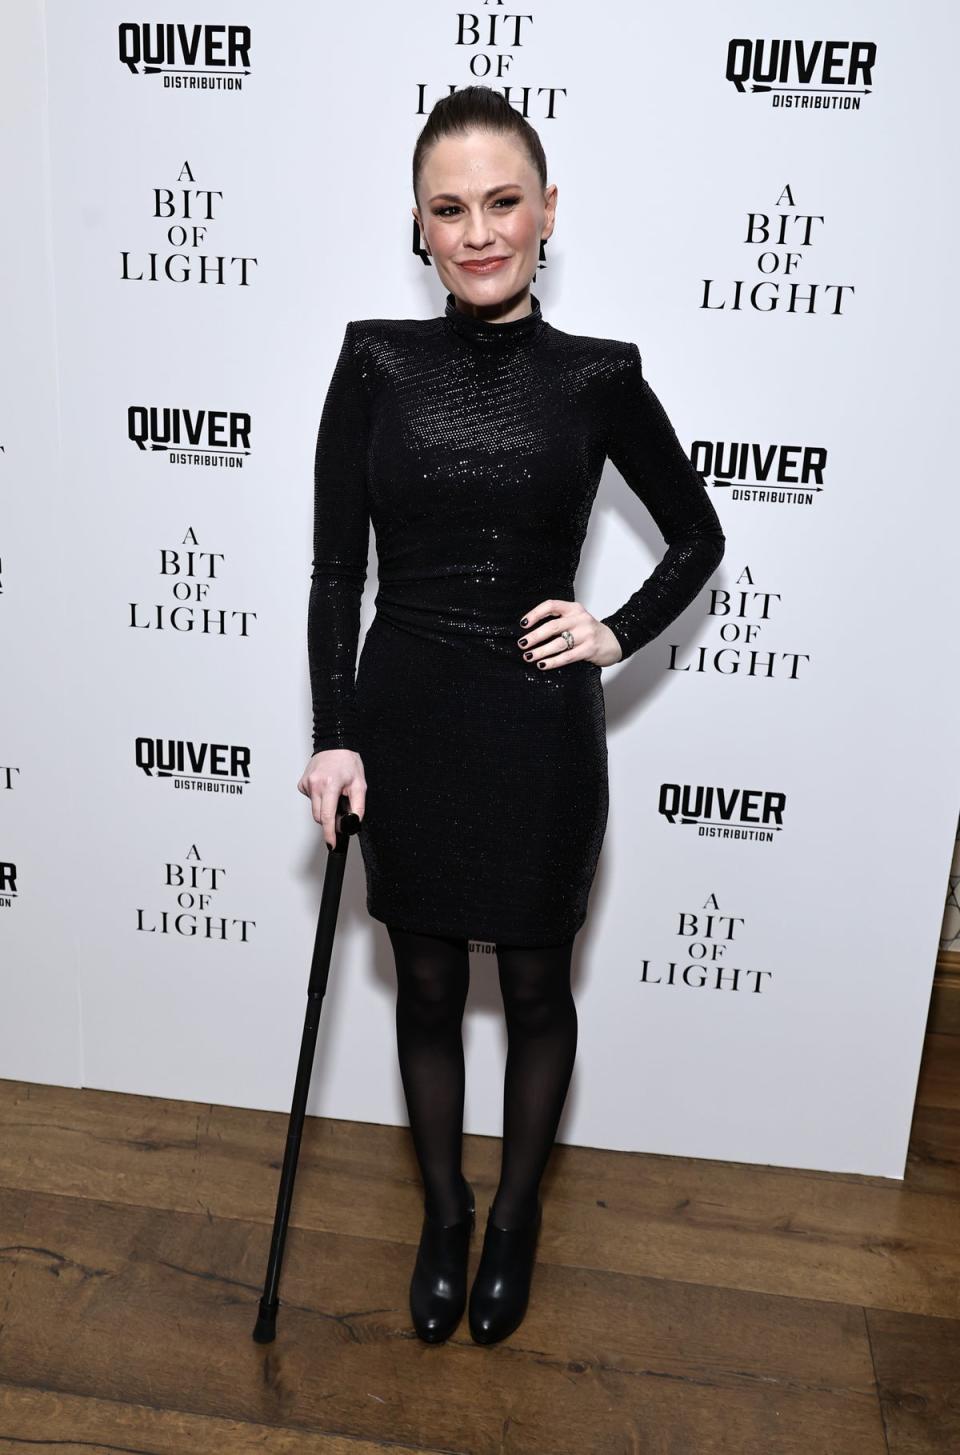 Anna Paquin walks with a cane at premiere of new film (Getty Images)